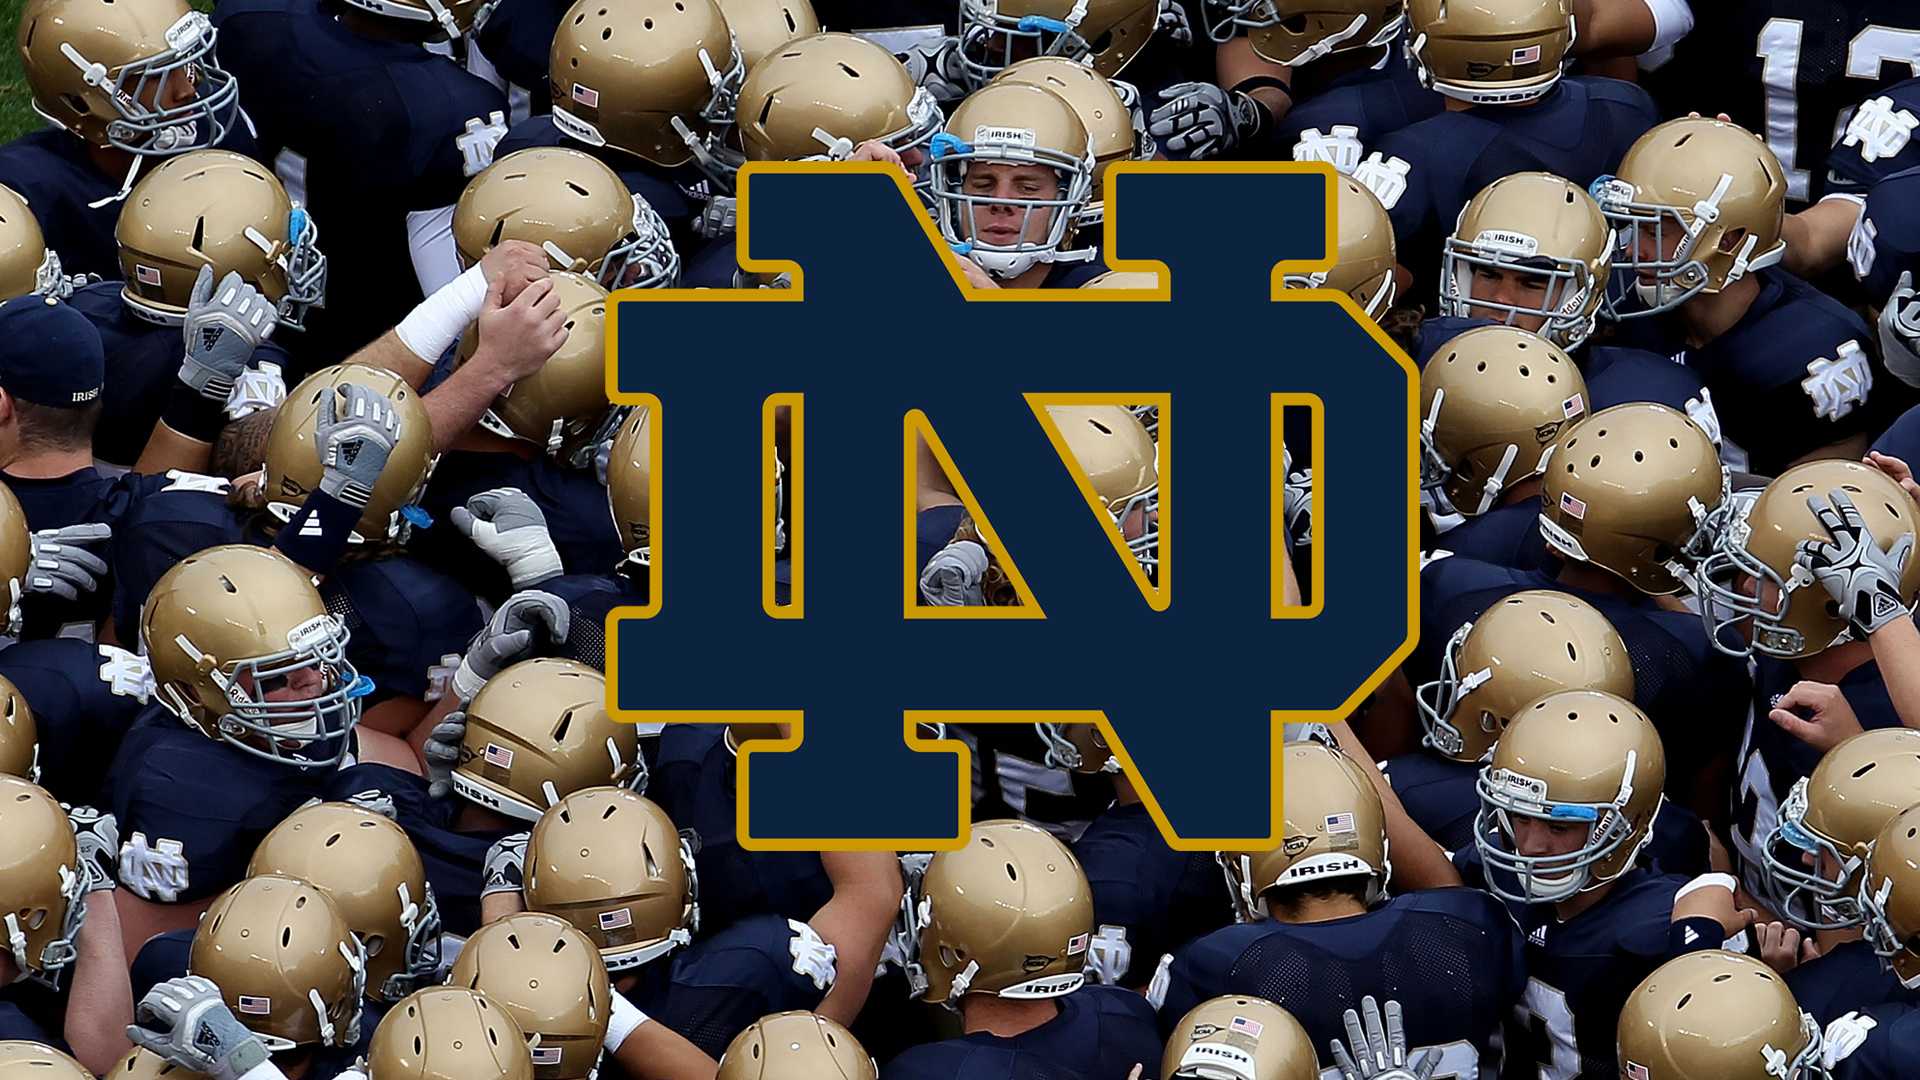 Notre Dame Football Wallpapers